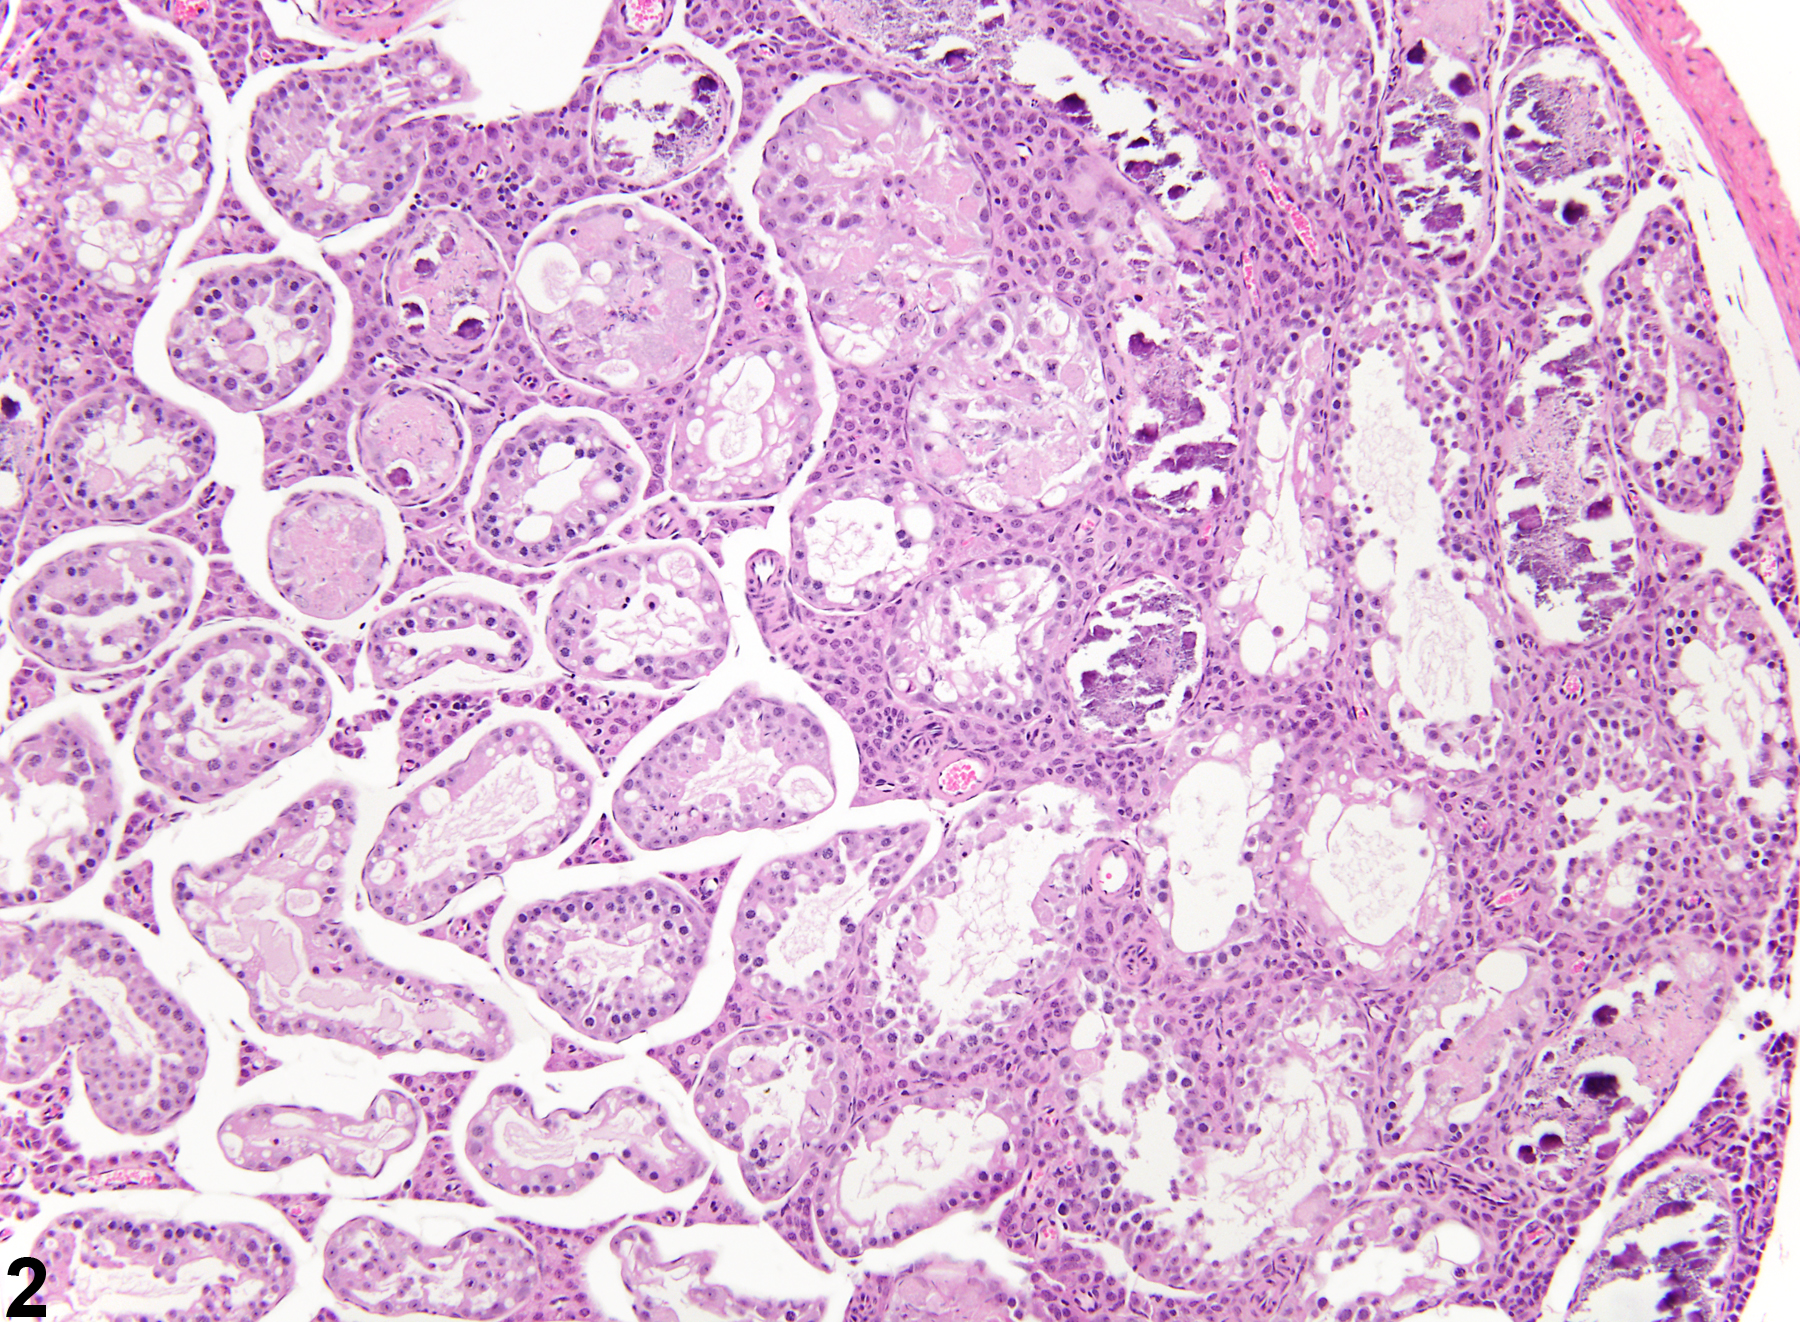 Image of mineralization in the testis from a male B6C3F1 mouse in a chronic study